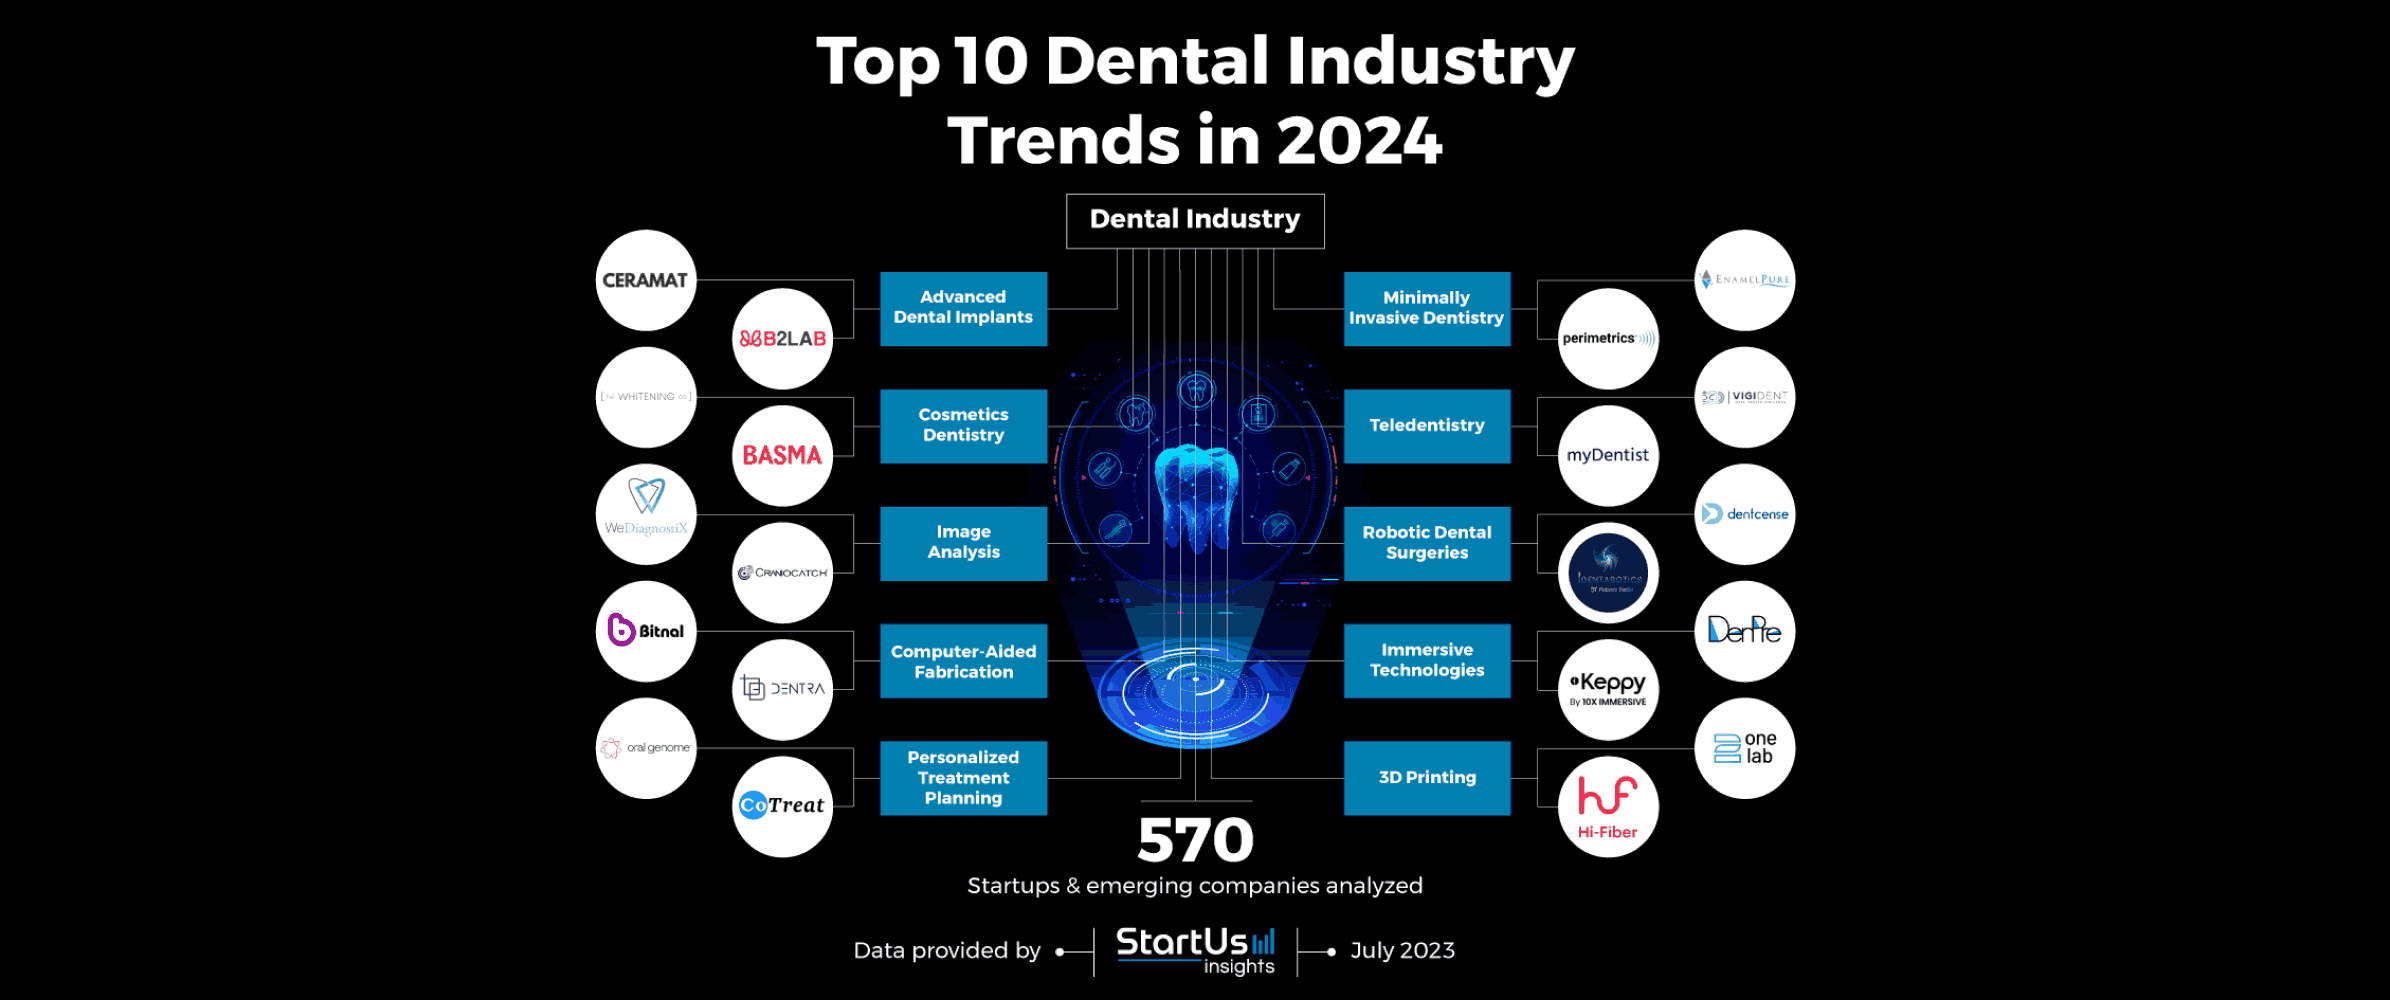 Uncover the Top 10 Dental Industry Trends in 2024